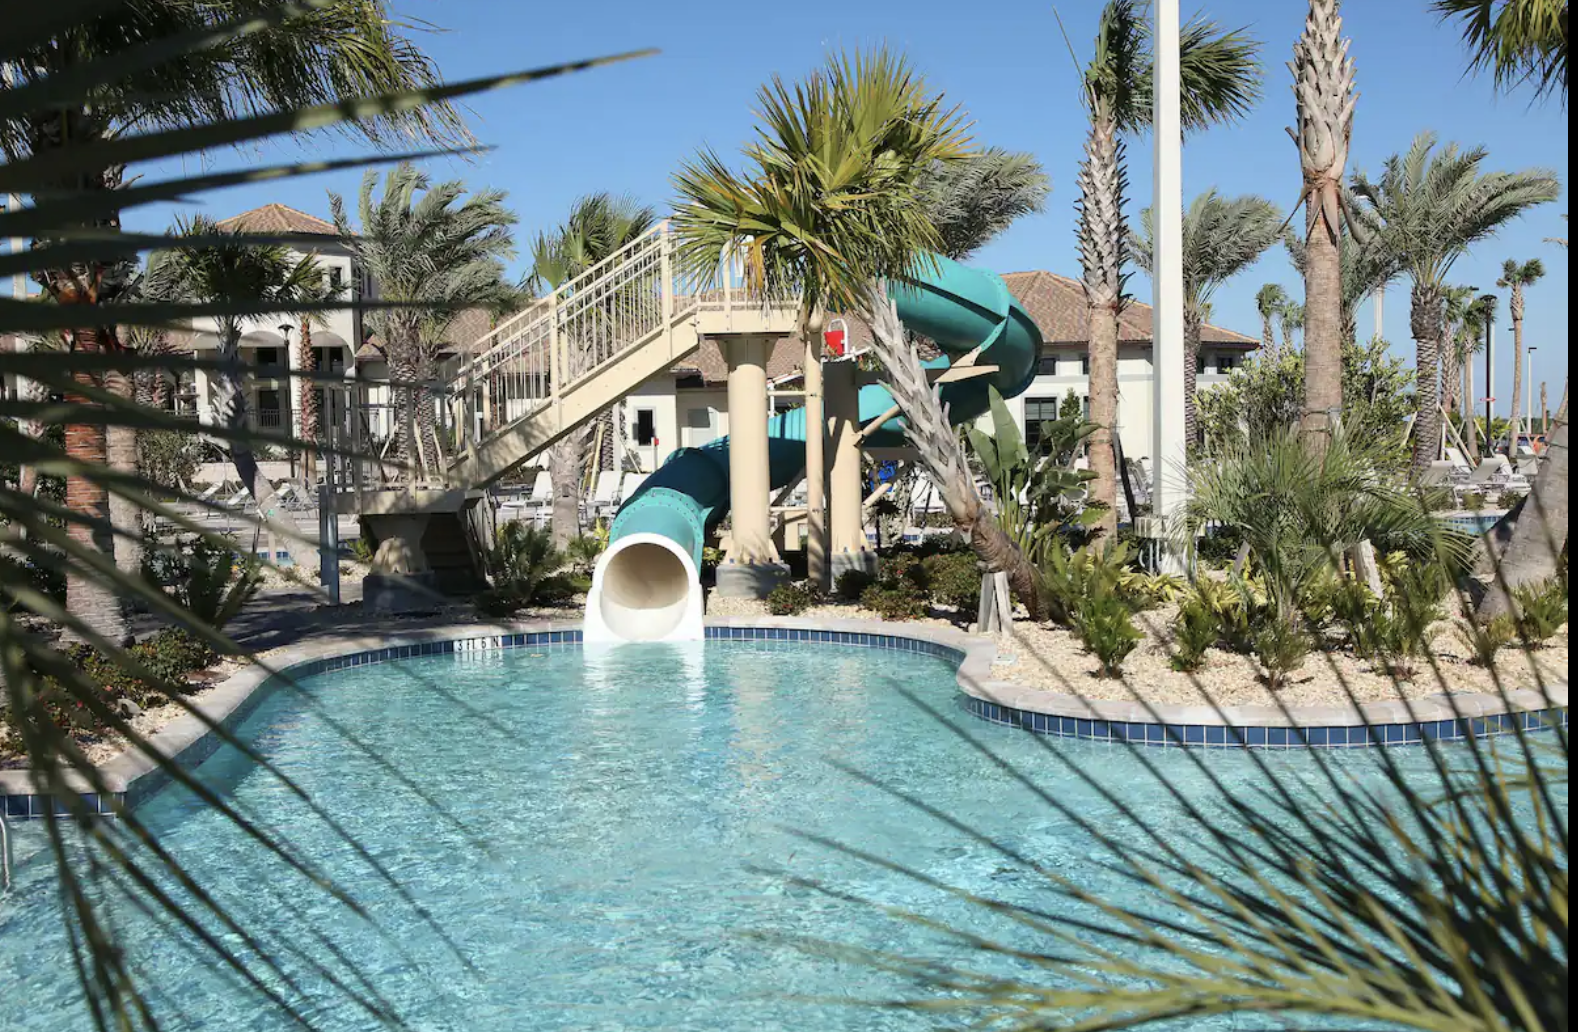 The Champions Gate slide into Lazy River.